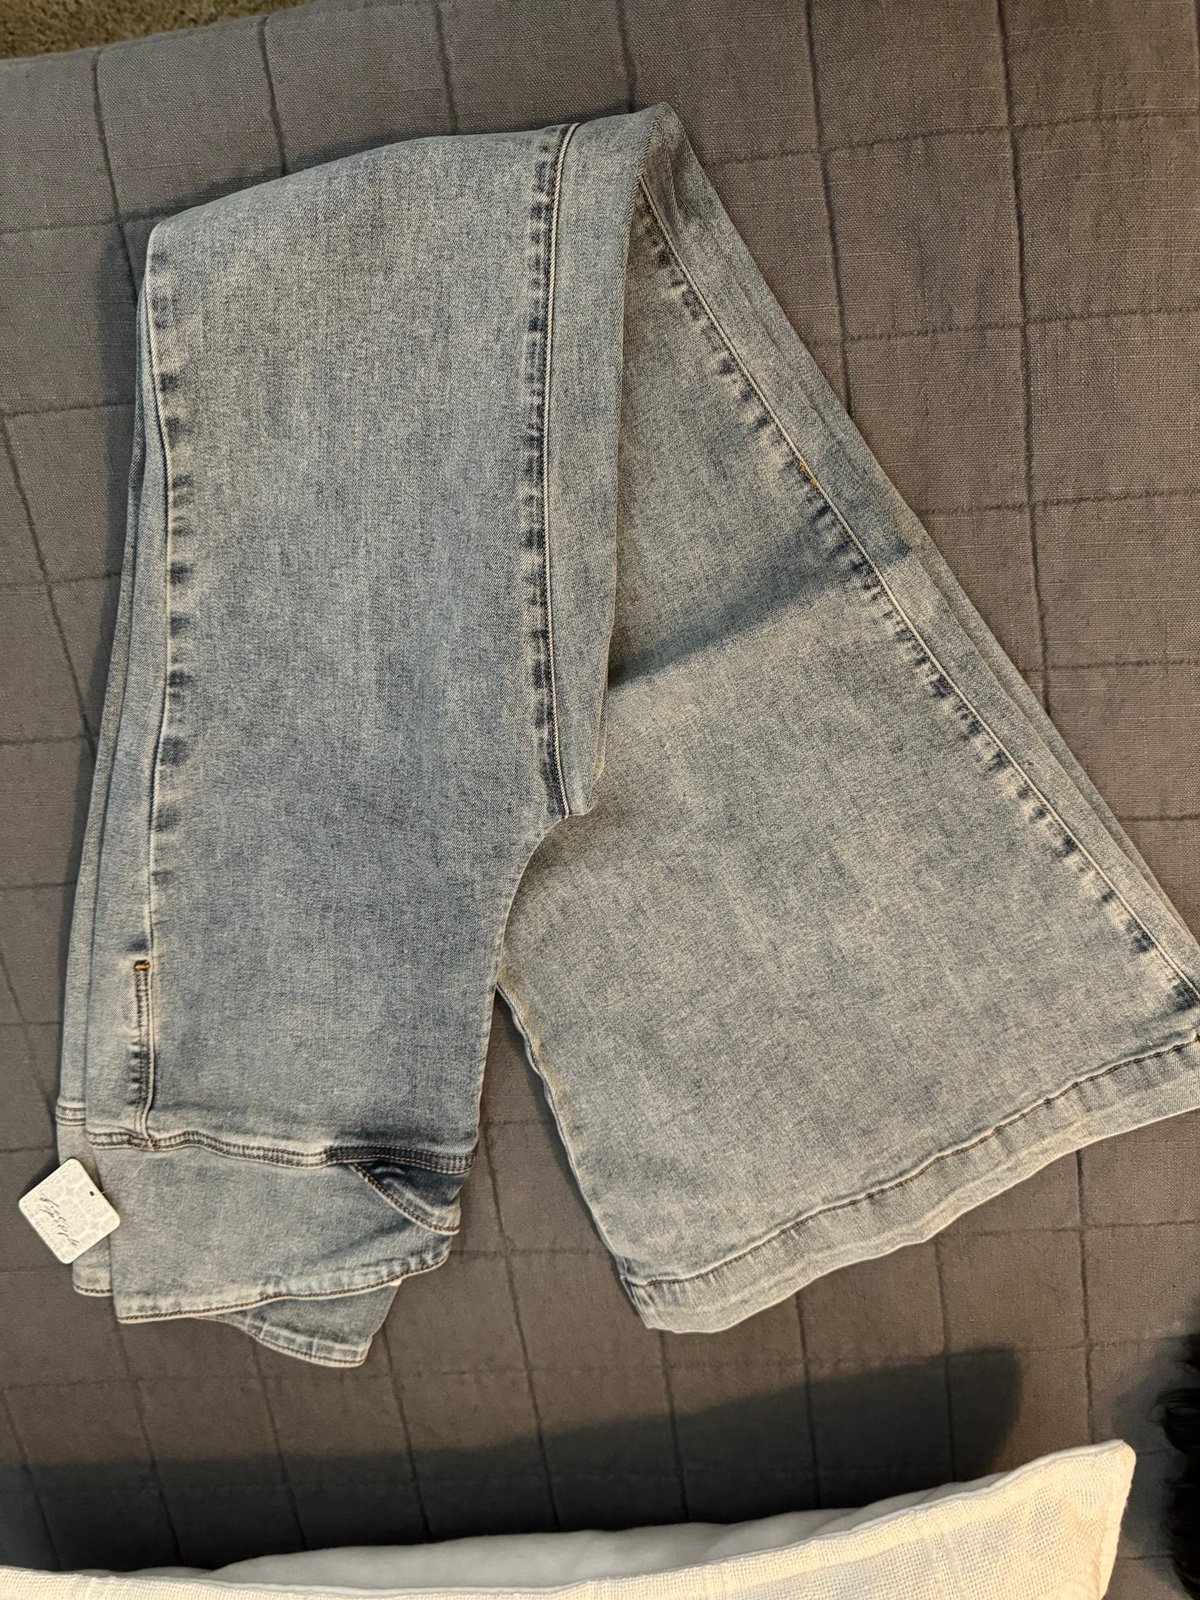 Amazing Free People flare jeans size 27 P5cewDSXX Facto